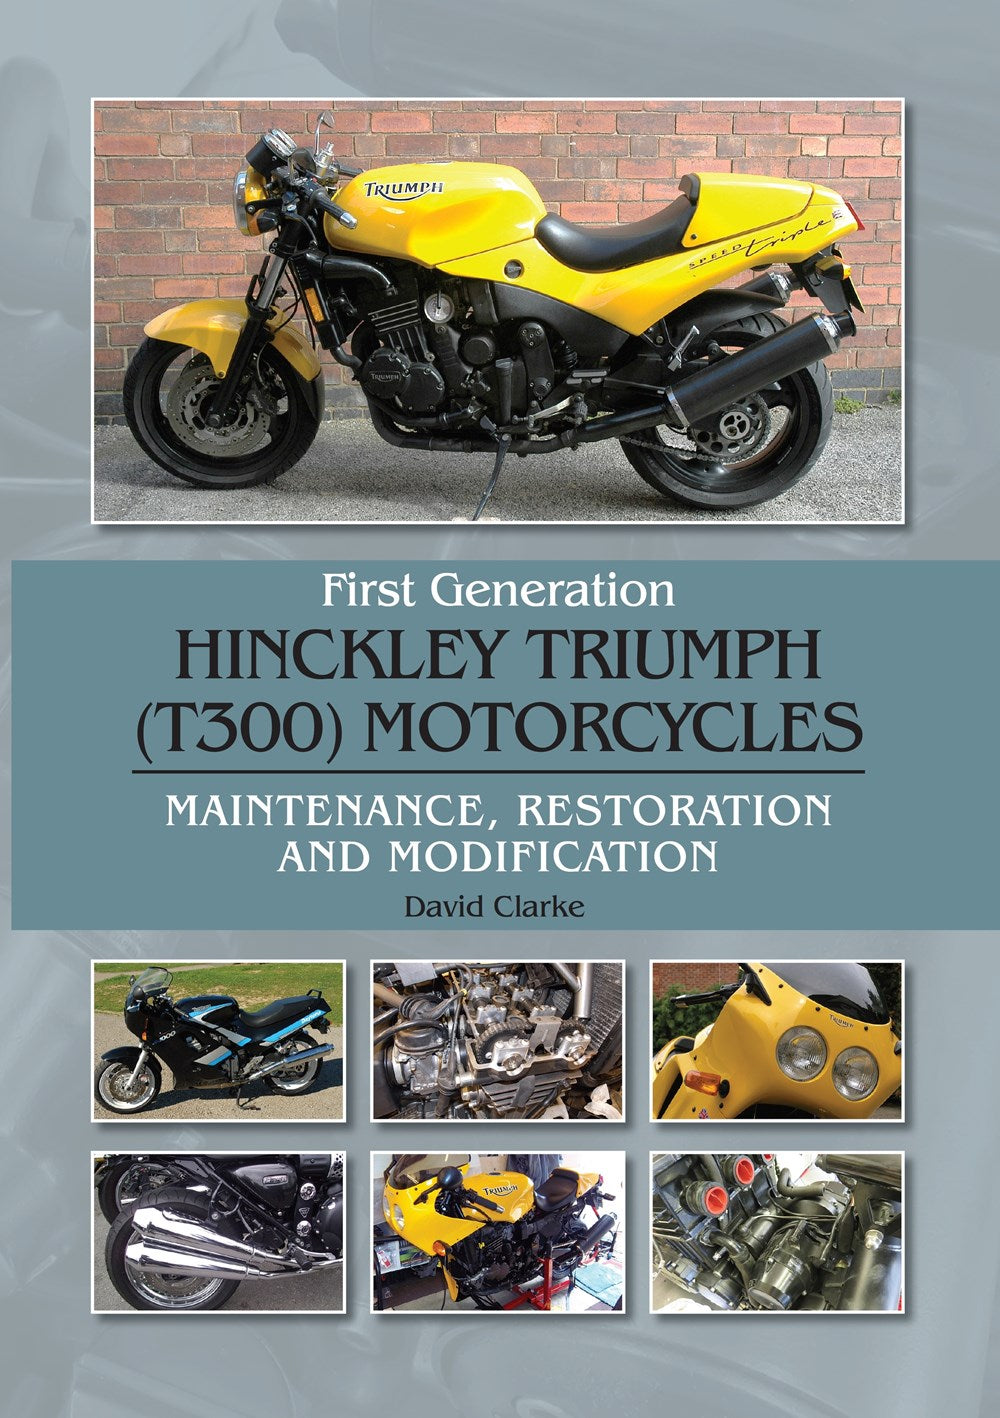 FIRST GENERATION HINCKLEY TRIUMPH (T300) MOTORCYCLES